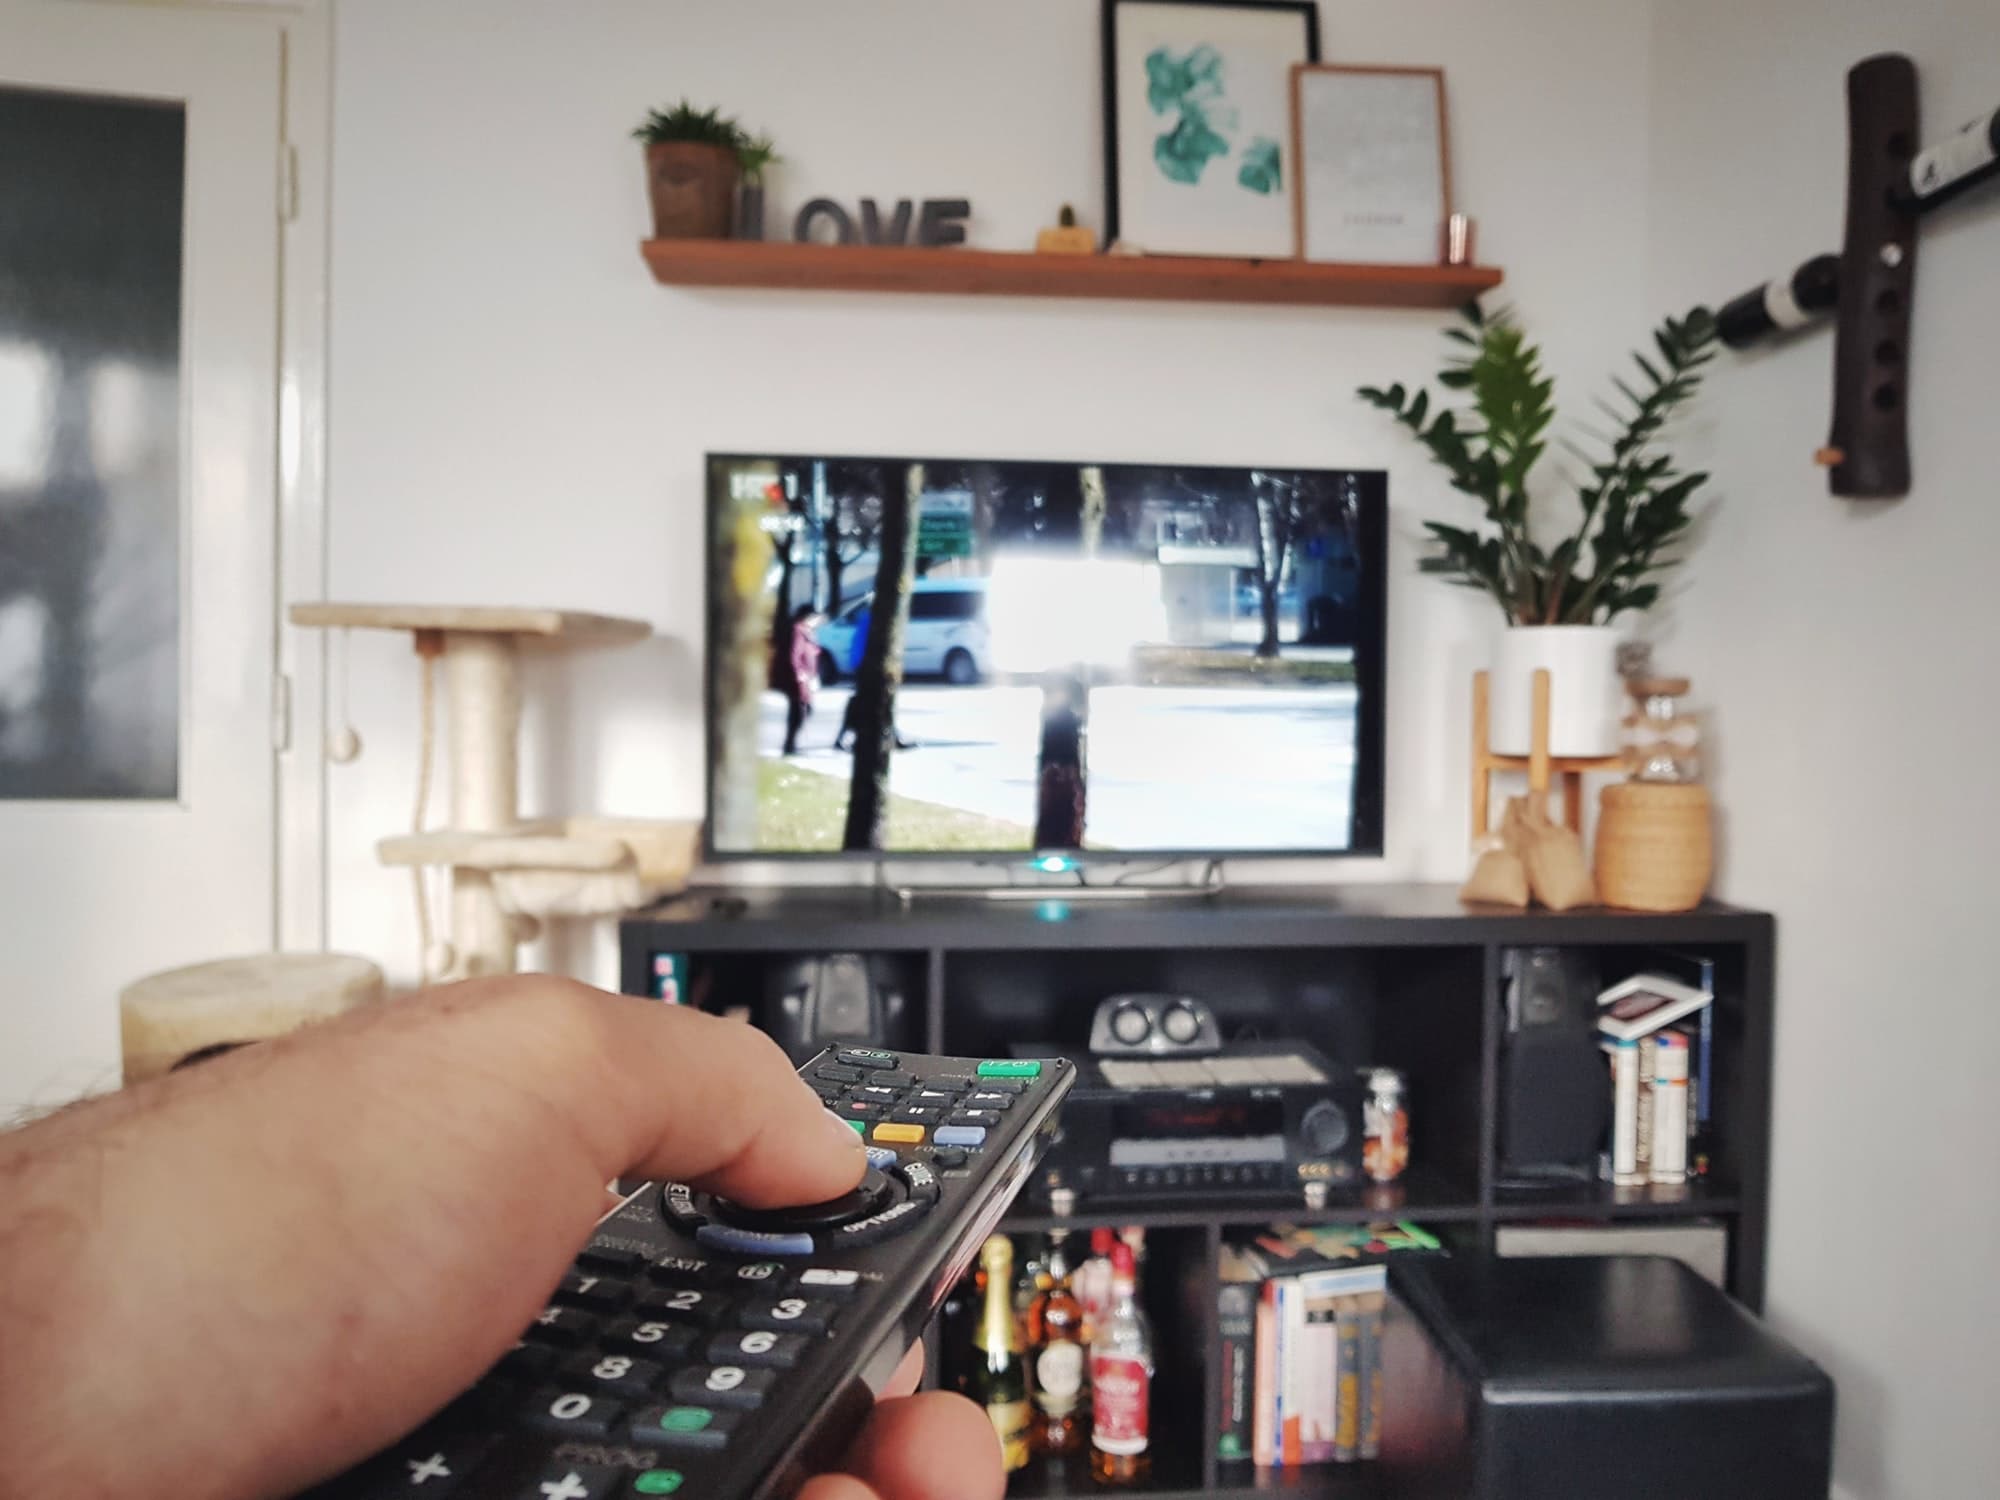 Hand on tv remote